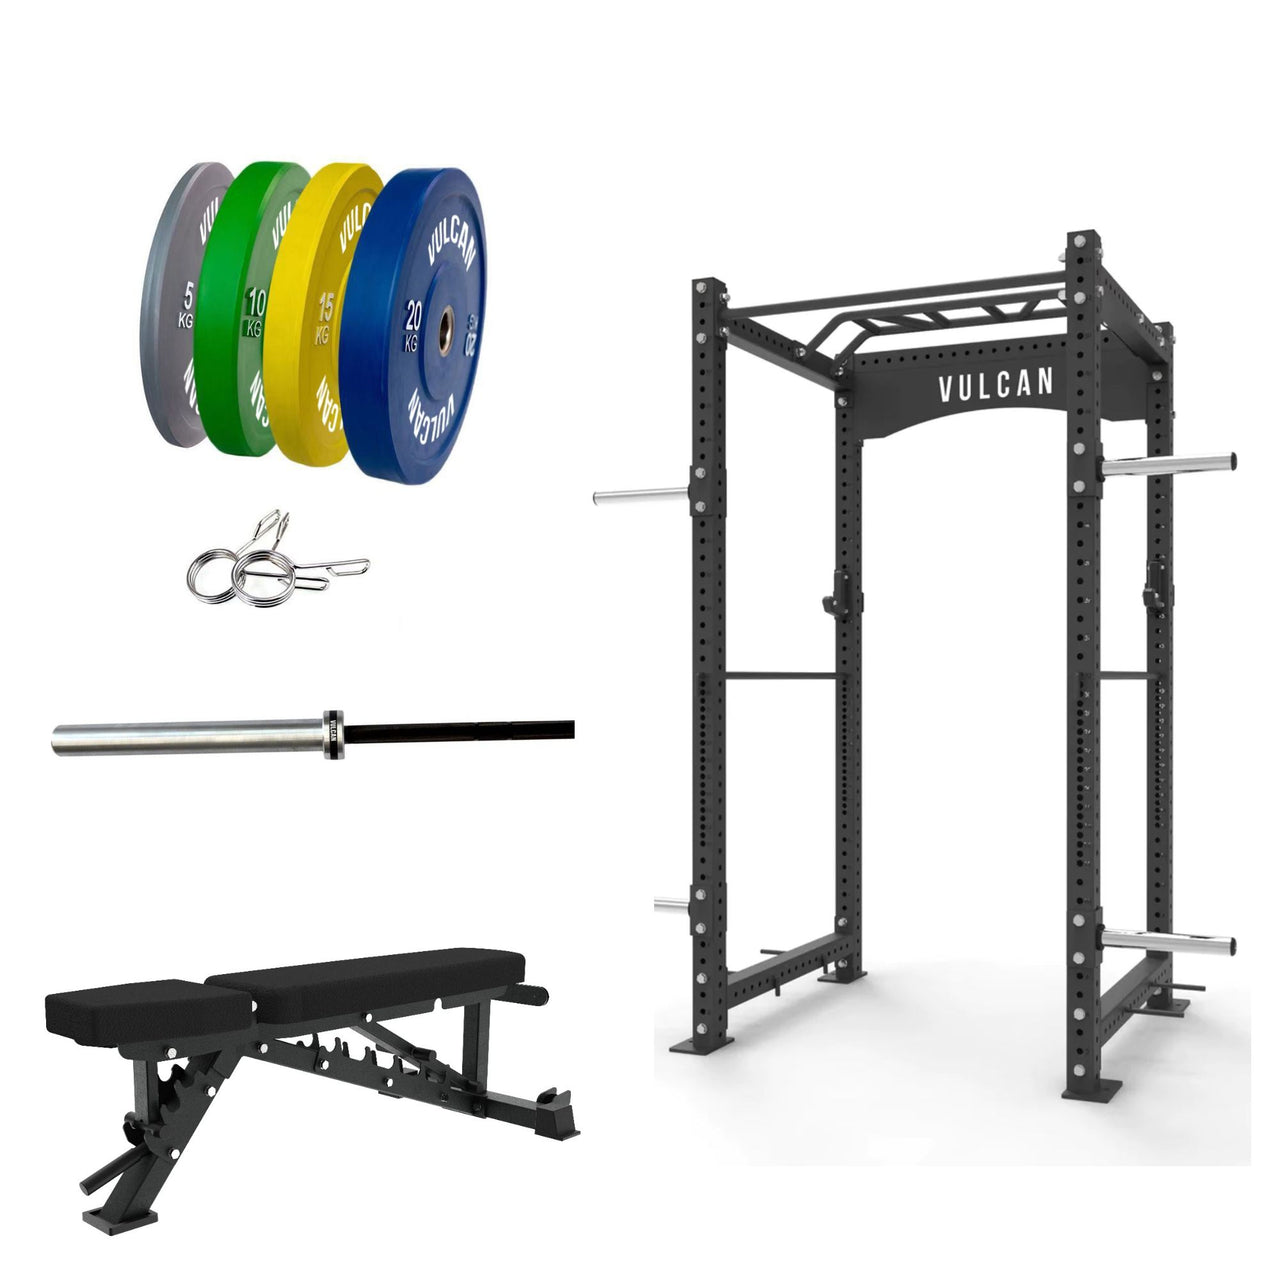 VULCAN Commercial Power Rack Olympic Barbell, 100kg Colour Bumper Weight Plates & Adjustable Bench | PRE-ORDER MID-LATE FEBRUARY